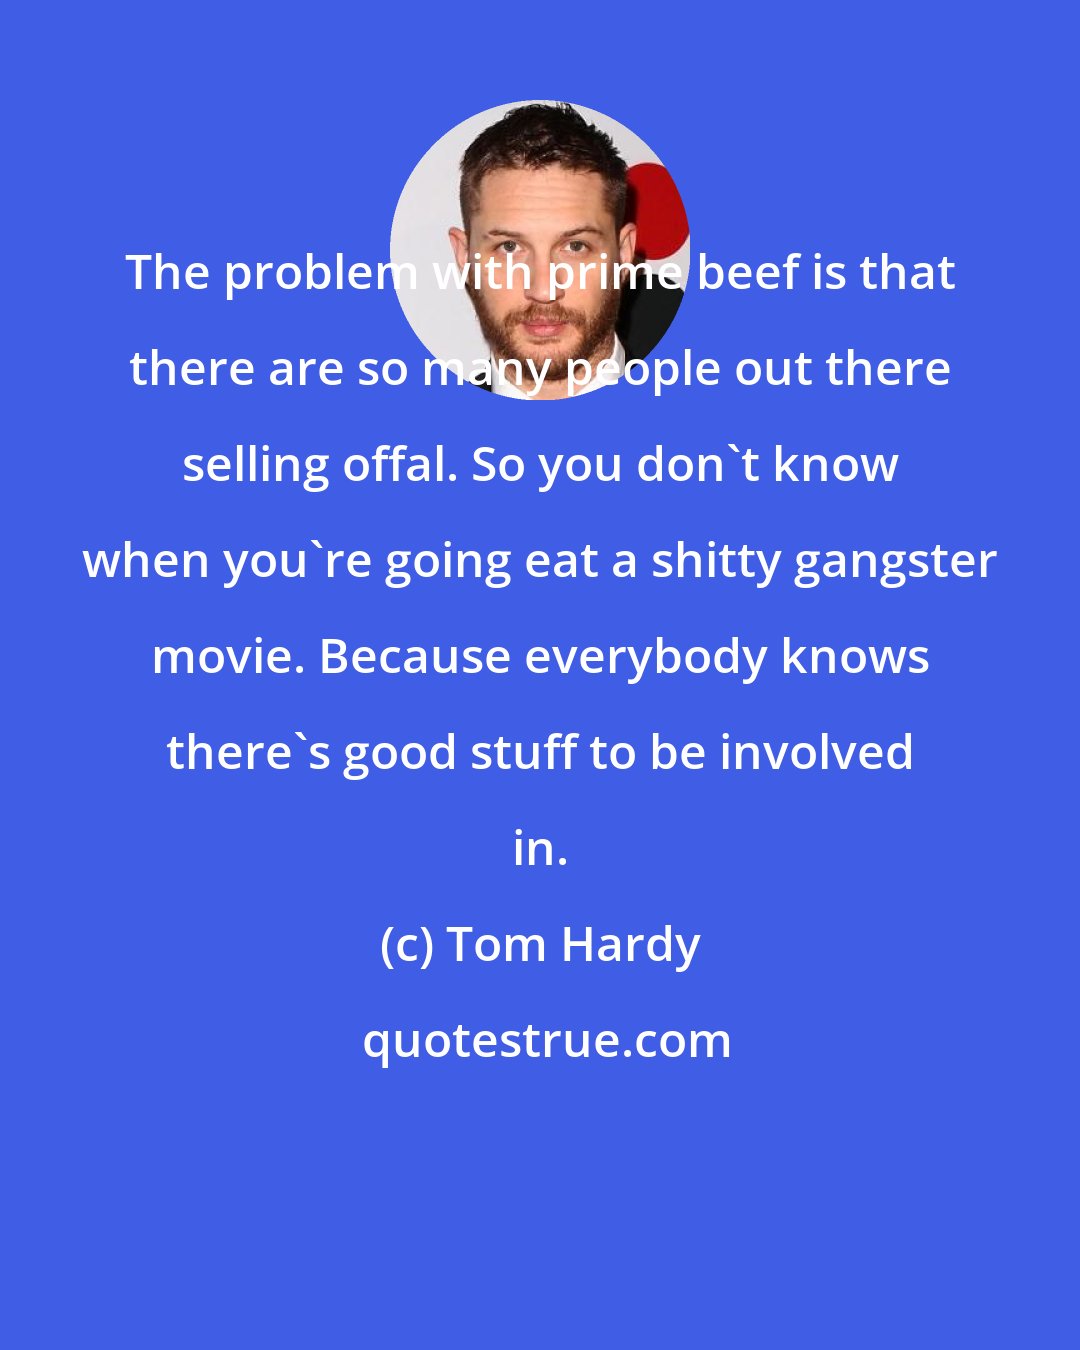 Tom Hardy: The problem with prime beef is that there are so many people out there selling offal. So you don't know when you're going eat a shitty gangster movie. Because everybody knows there's good stuff to be involved in.